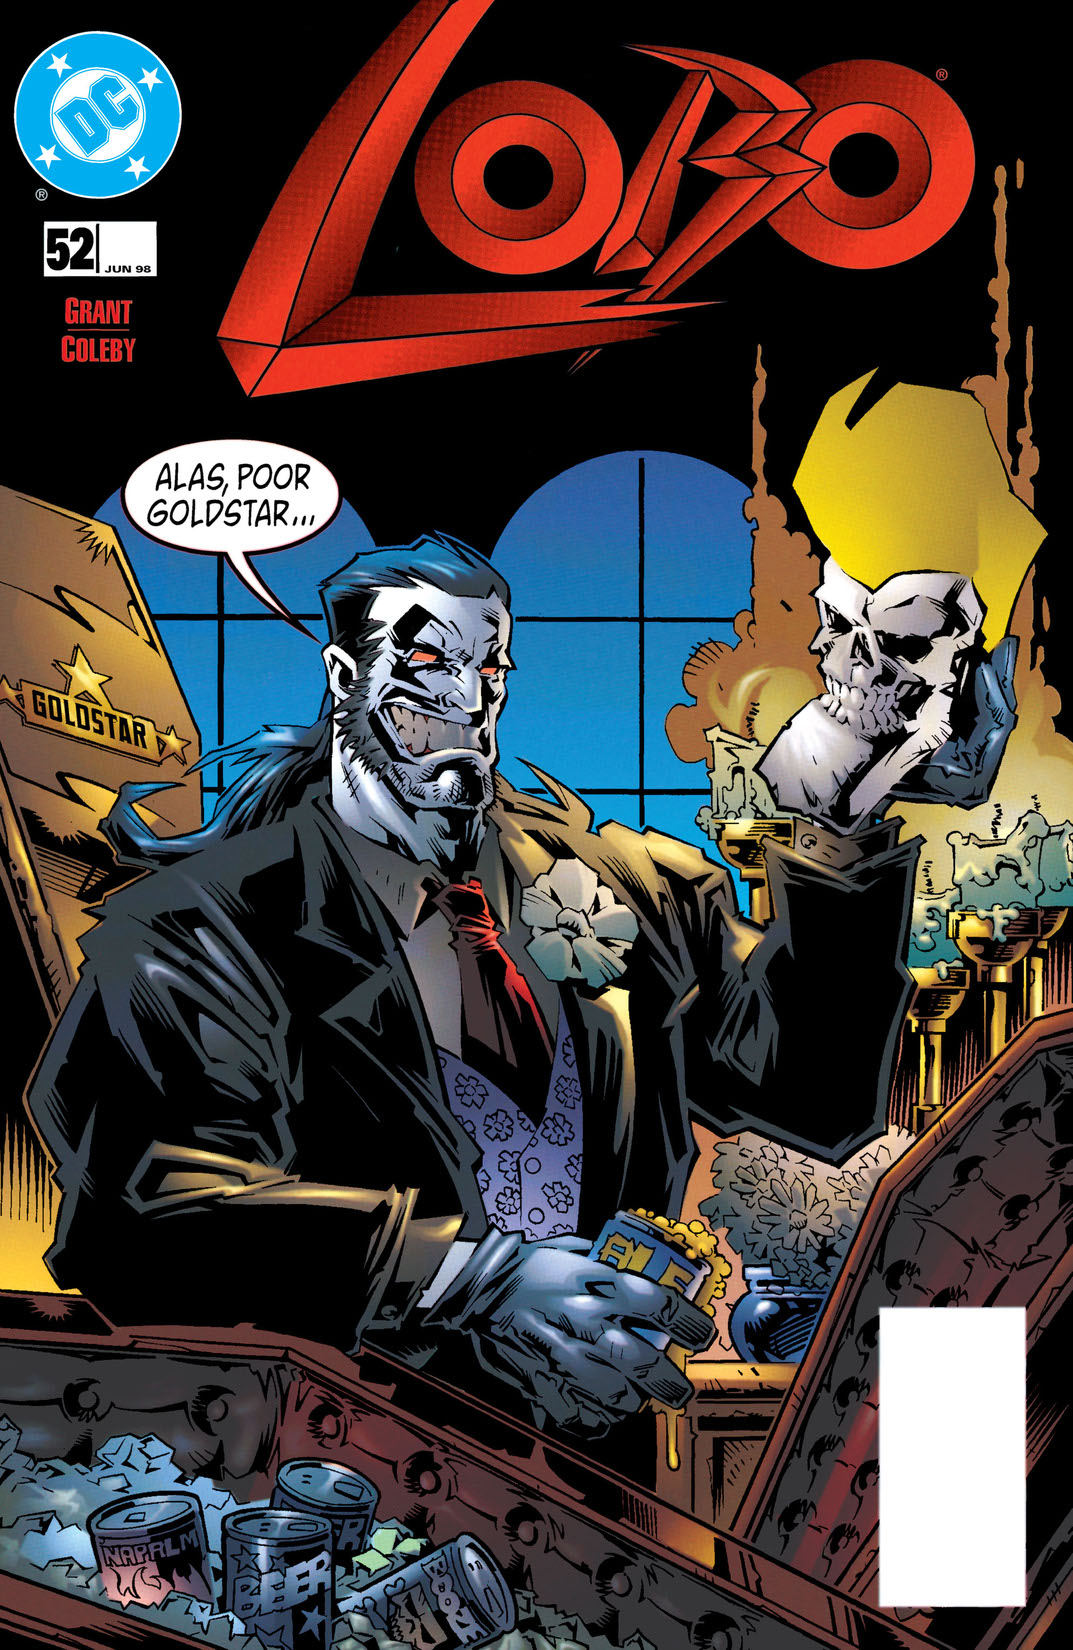 Lobo (1993-) #52 preview images